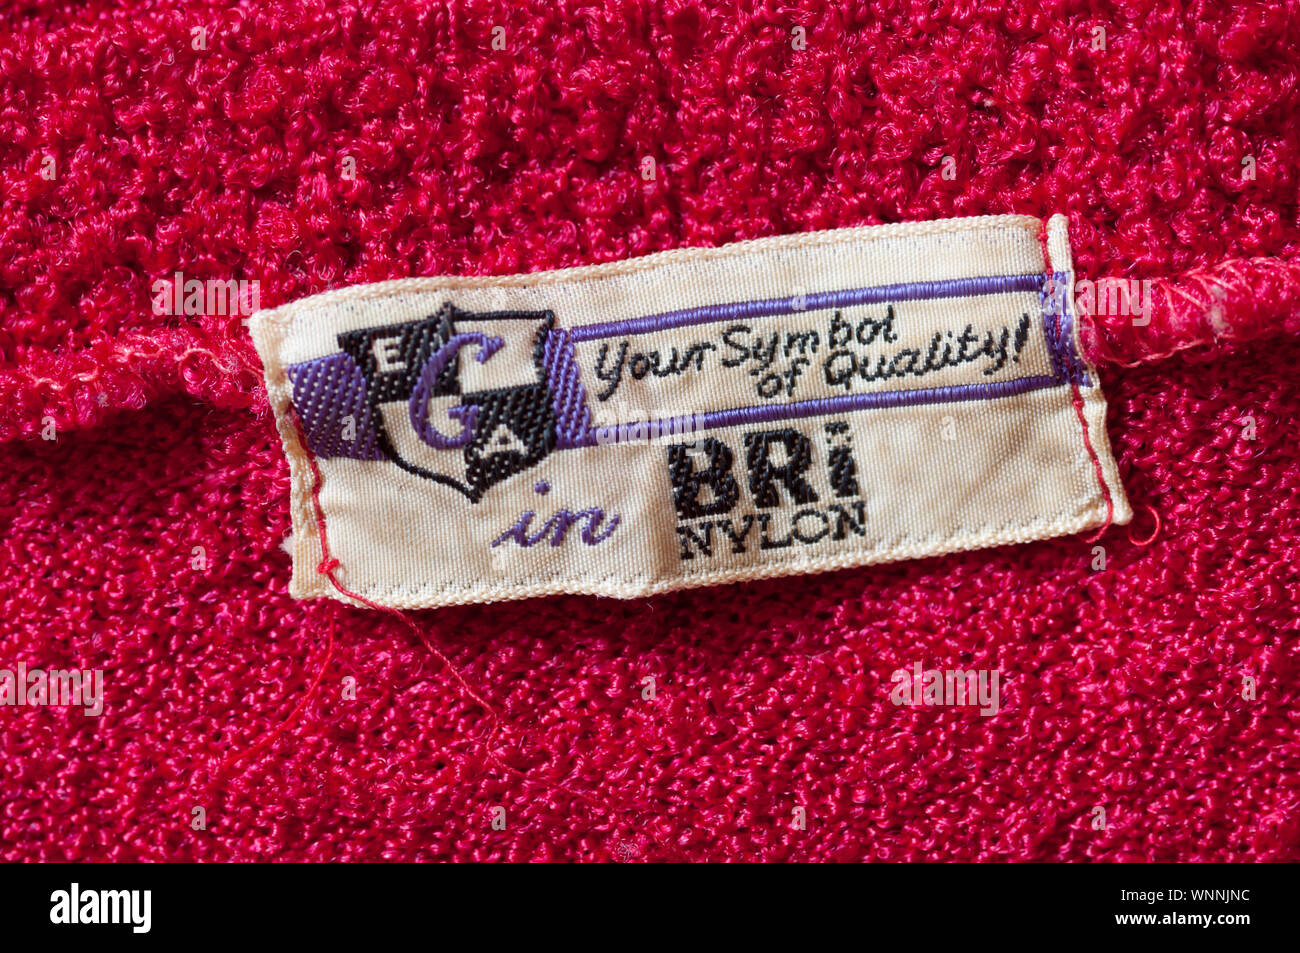 A bri-nylon label in 1960s or 1970s clothing. Stock Photo